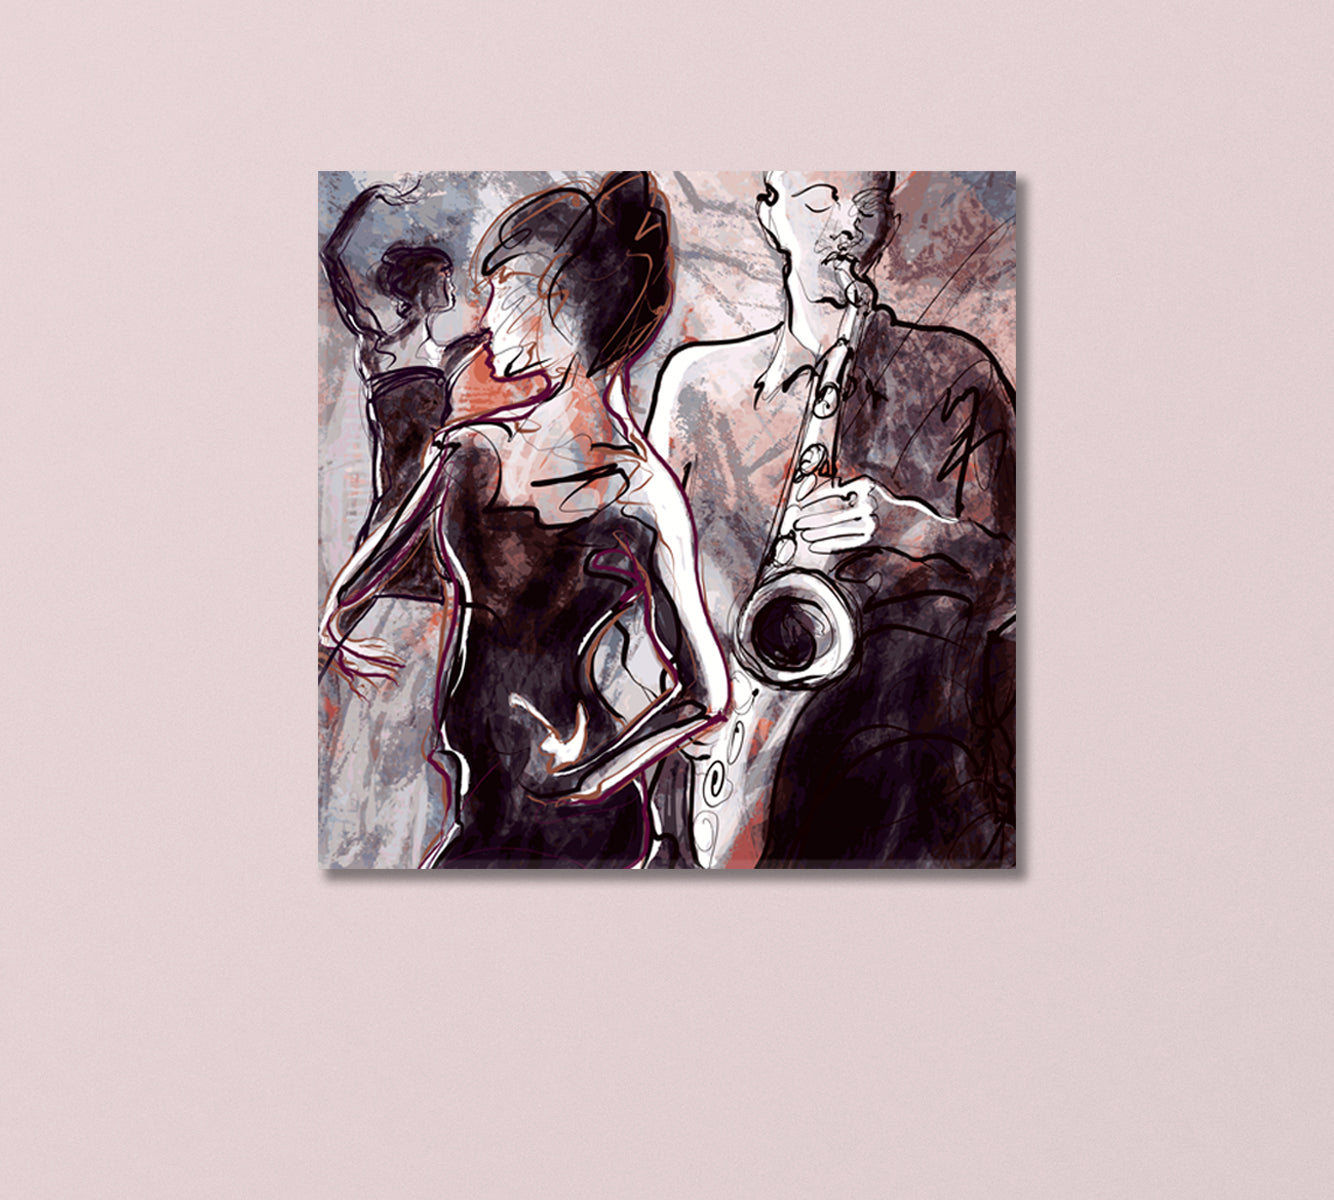 Jazz Saxophonist and Two Dancing Women Canvas Print-Canvas Print-CetArt-1 panel-12x12 inches-CetArt